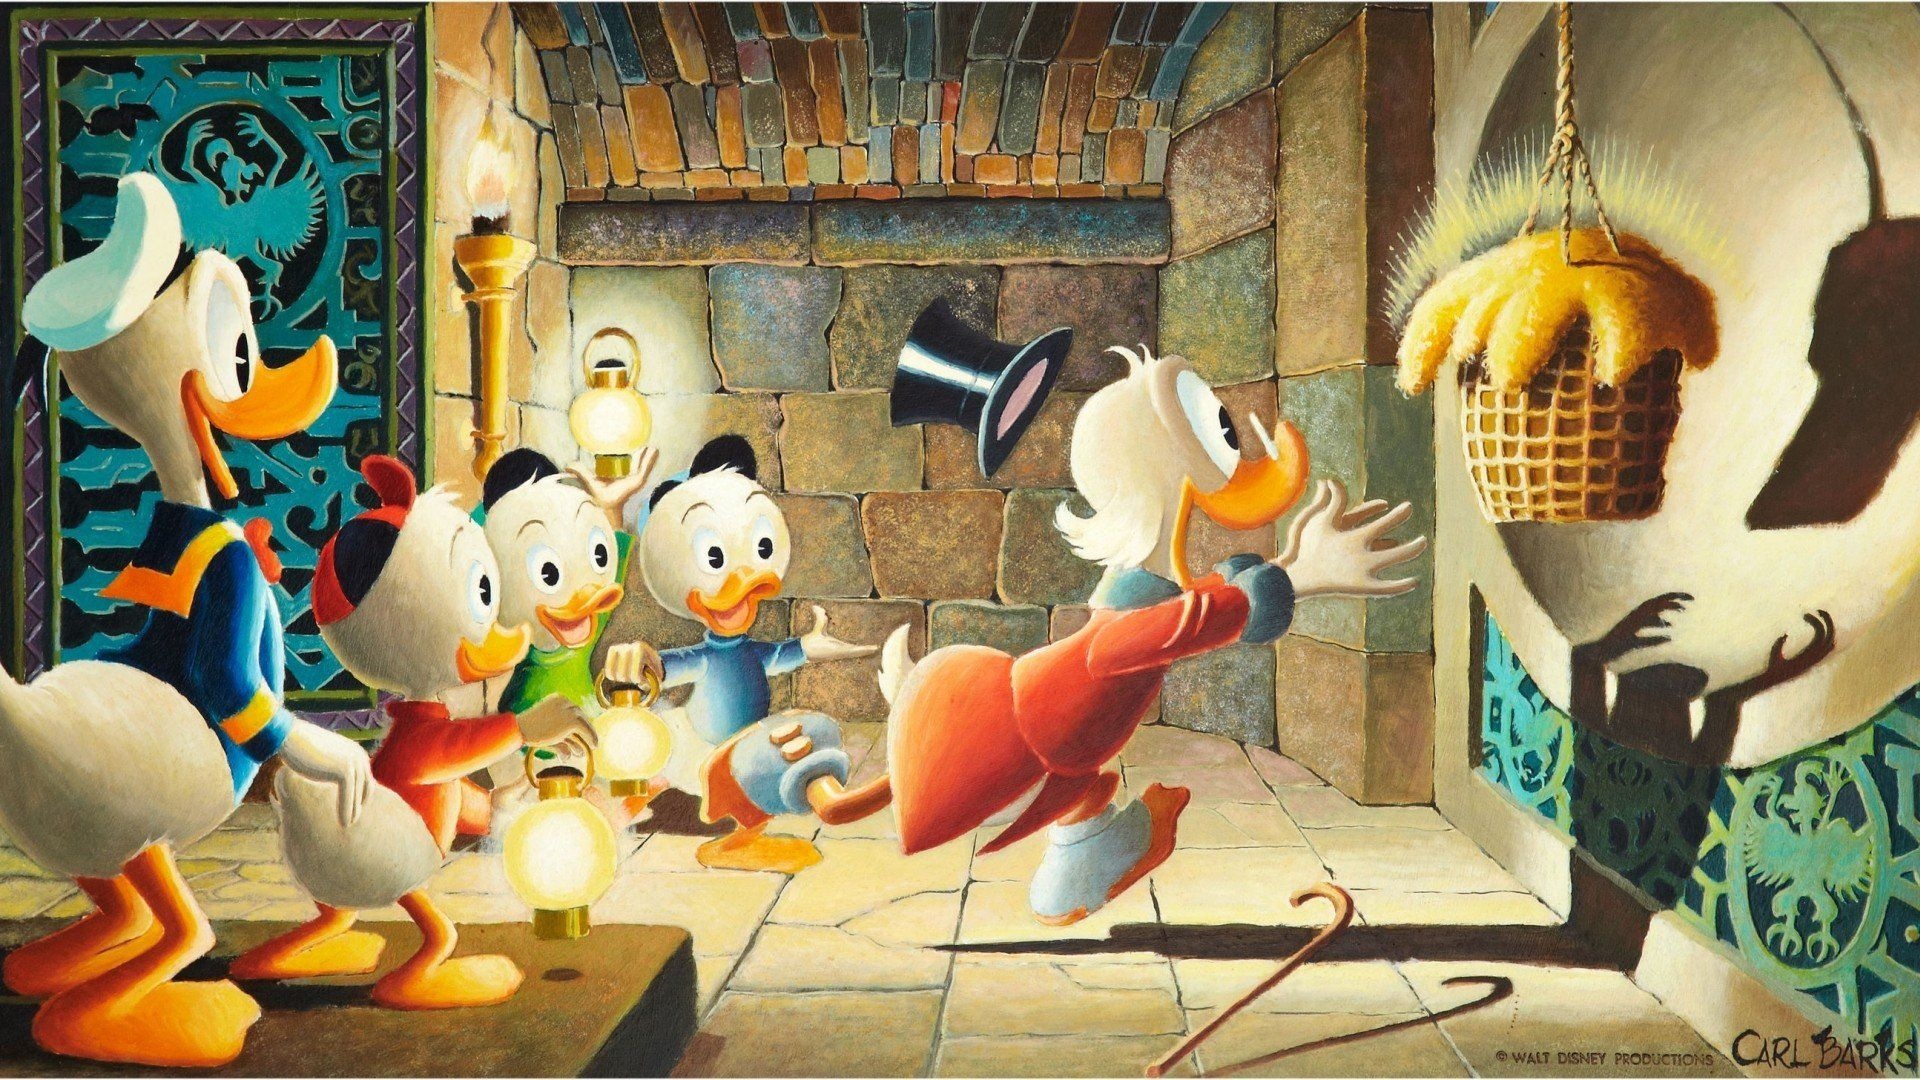 DuckTales Animation wallpapers, HD backgrounds, Animated ducks, Comedy series, 1920x1080 Full HD Desktop